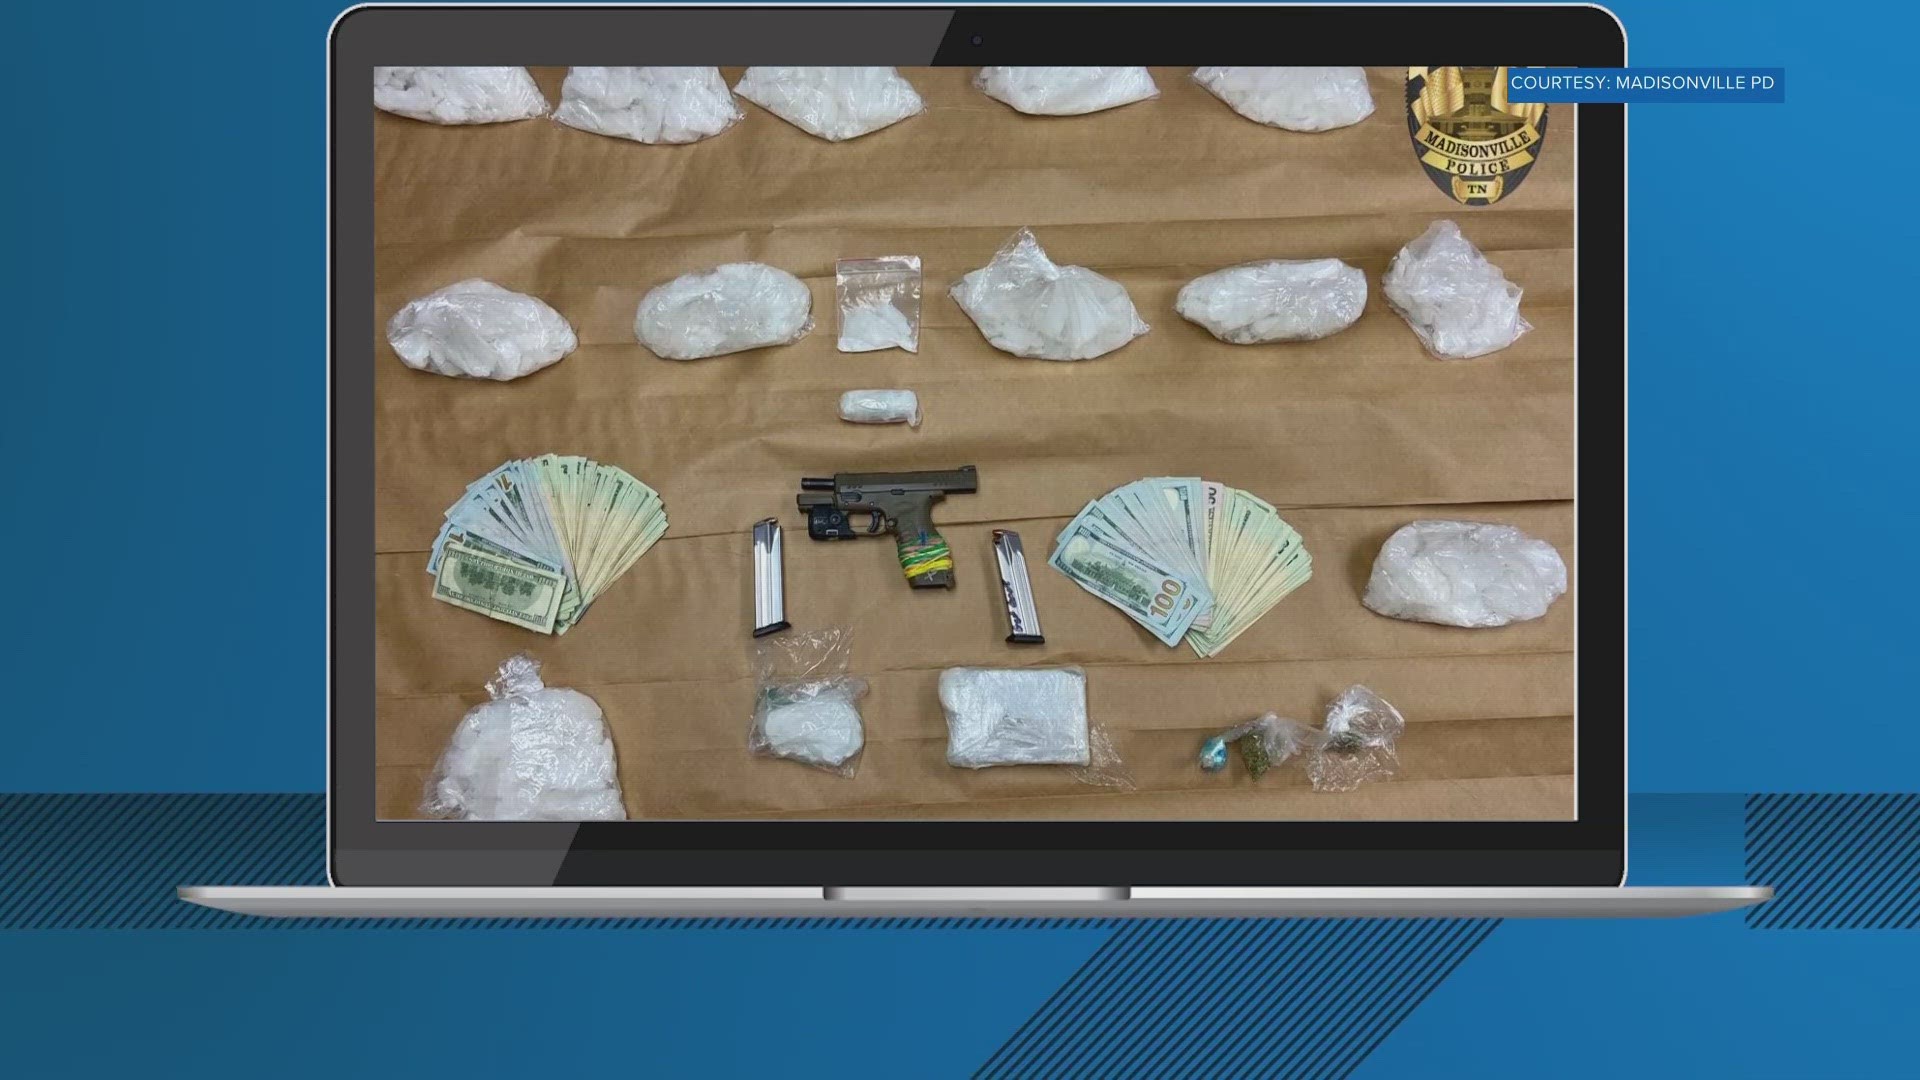 Investigators say they found one pound of fentanyl and ten pounds of methamphetamine. 	The drugs had a street value of nearly $300,000.